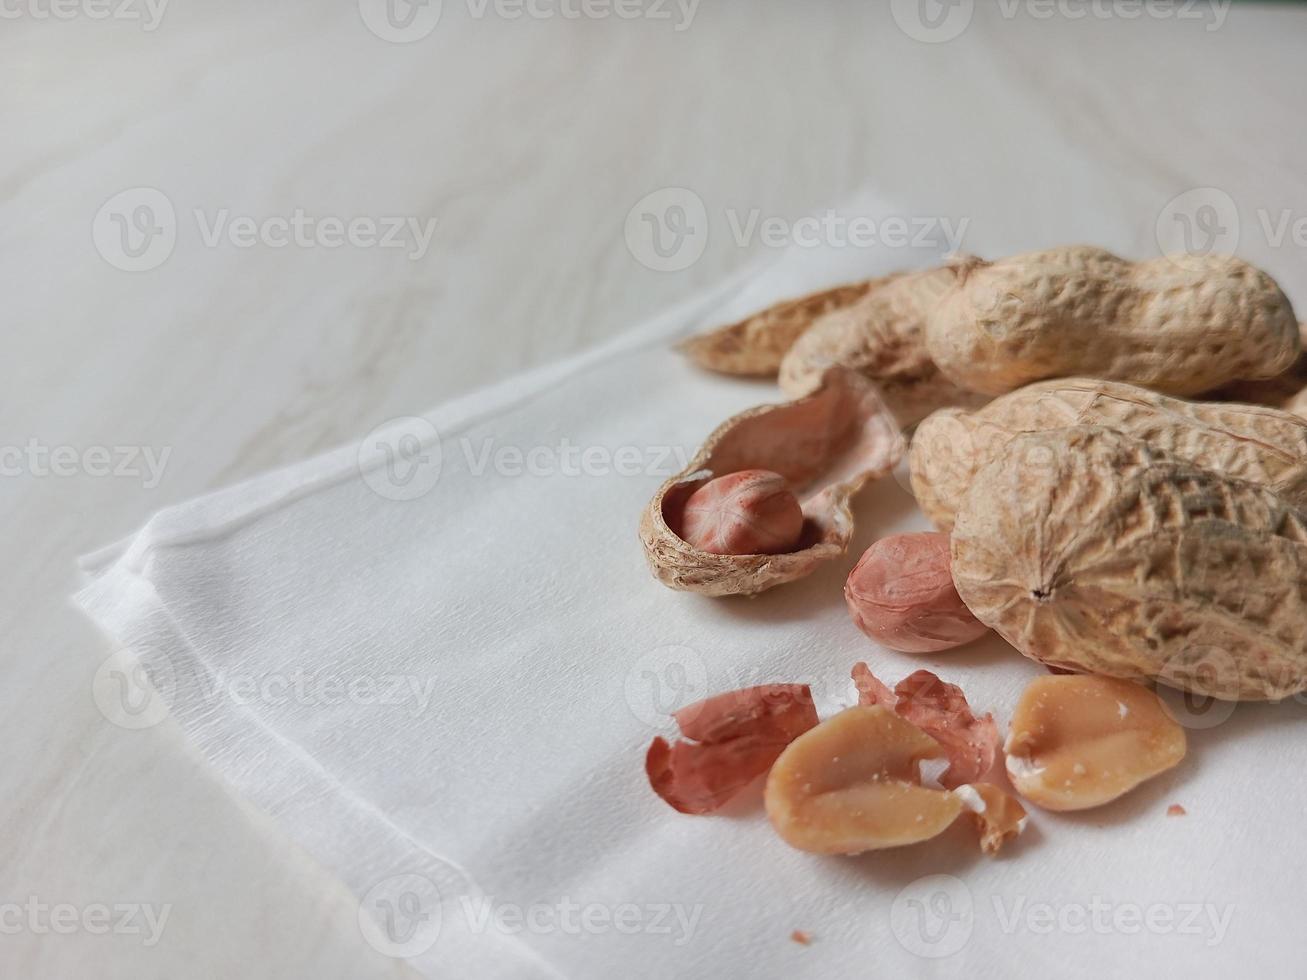 Side view of peanuts on a textured table, peanut shells photo